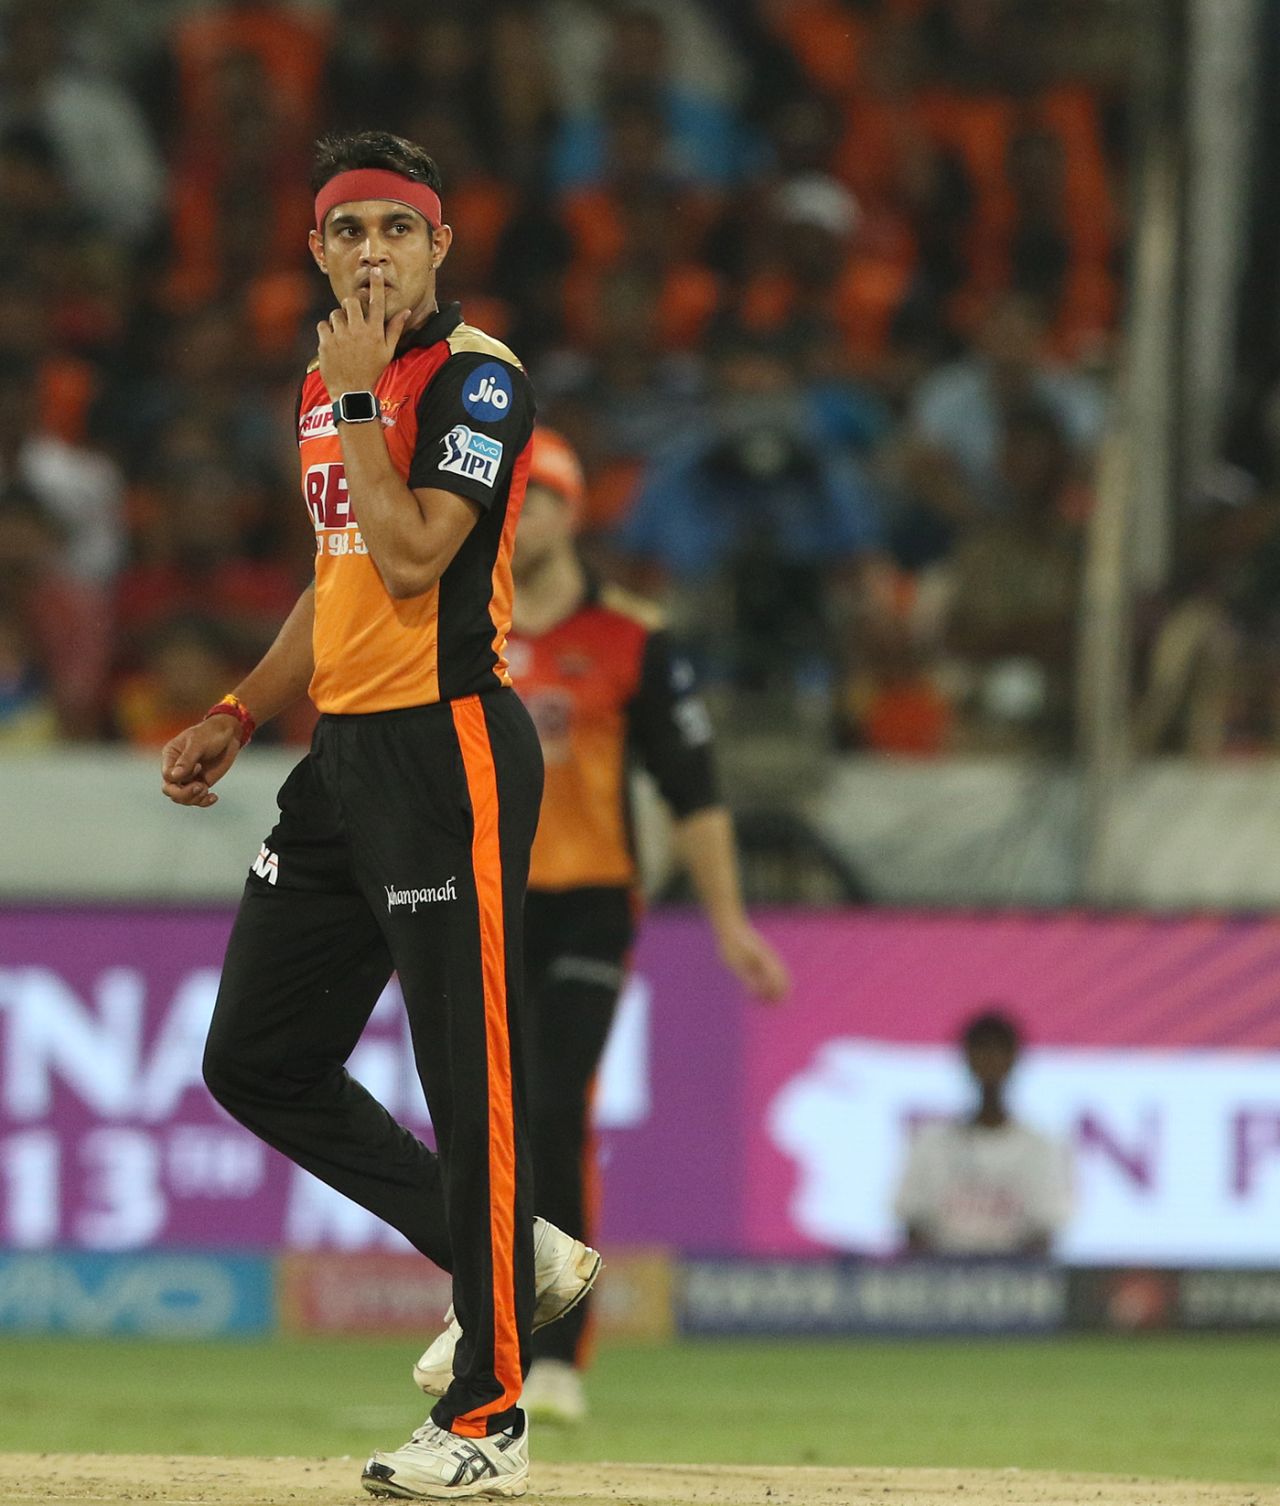 Siddarth Kaul reacts in the field, Sunrisers Hyderabad v Royal Challengers Bangalore, Hyderabad, IPL 2018, May 7, 2018